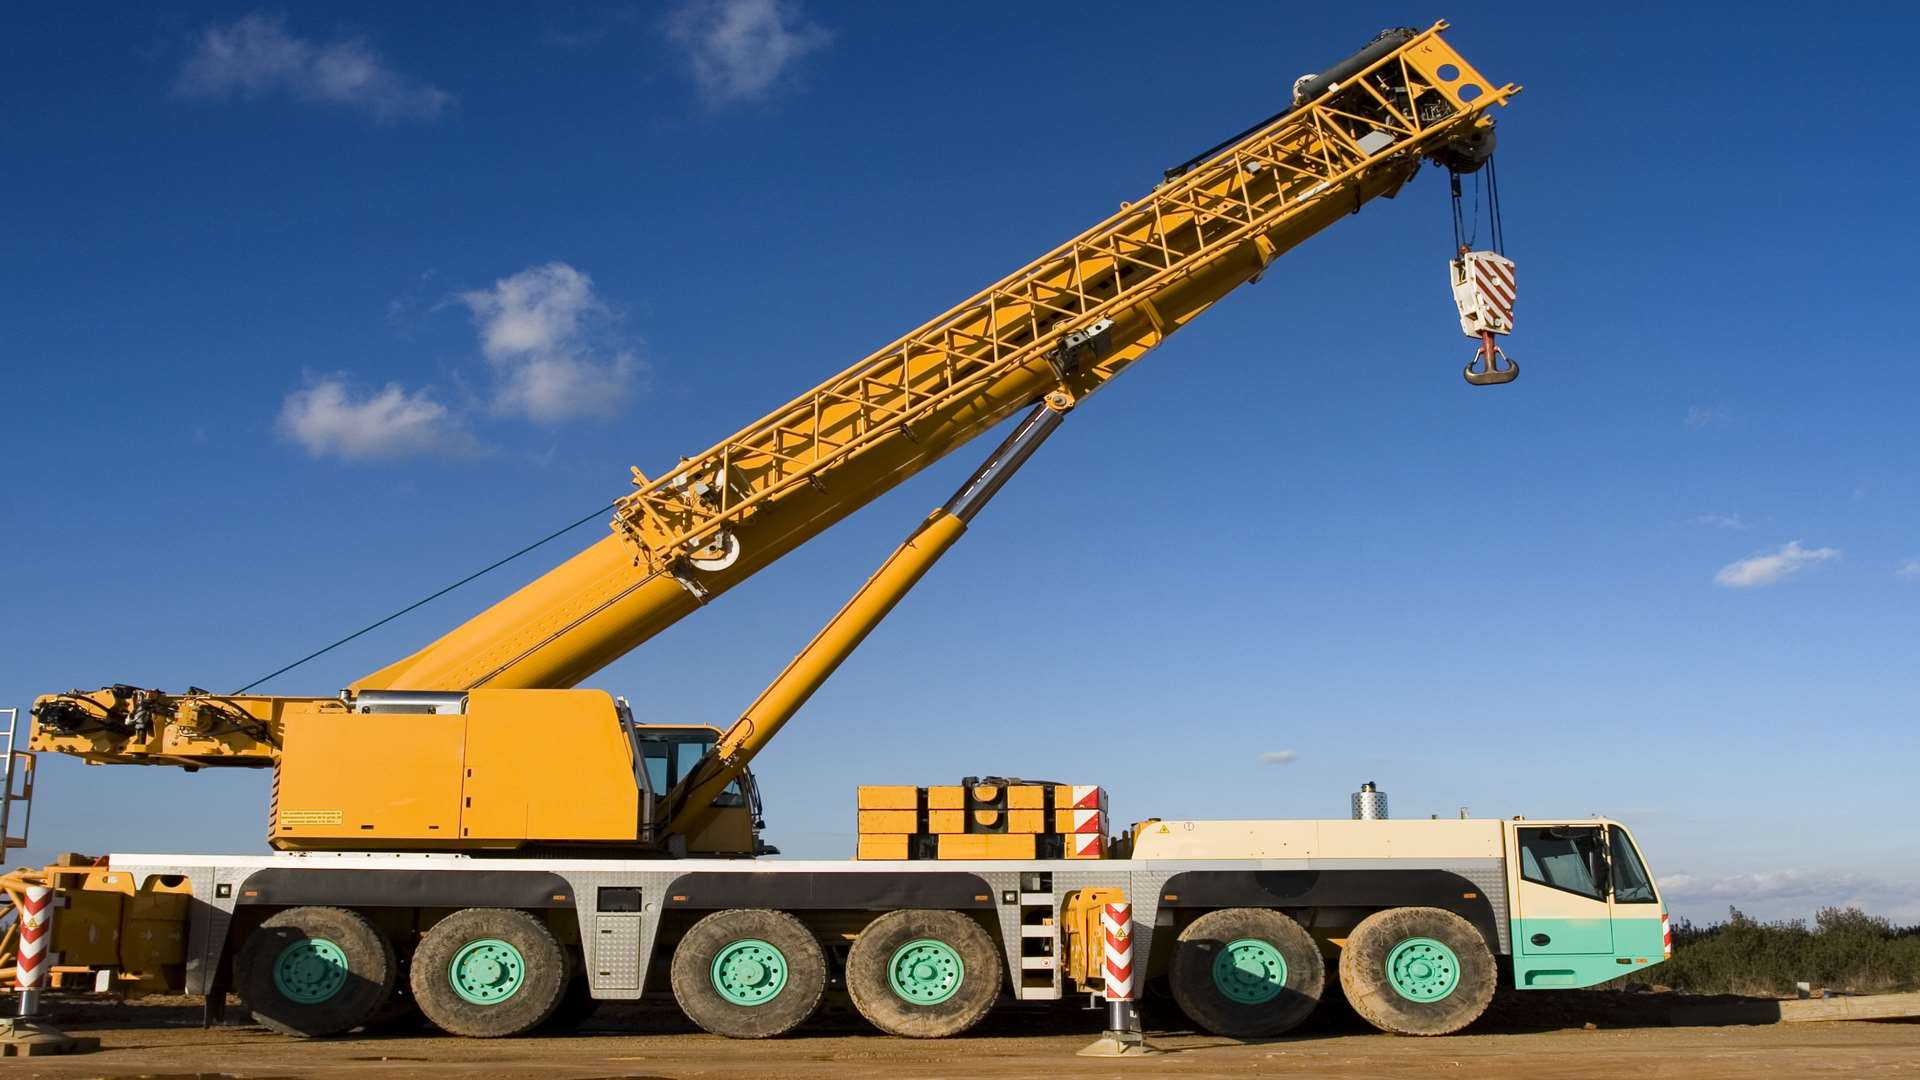 A man was injured when a mobile crane collapsed in Broomfield. Library image